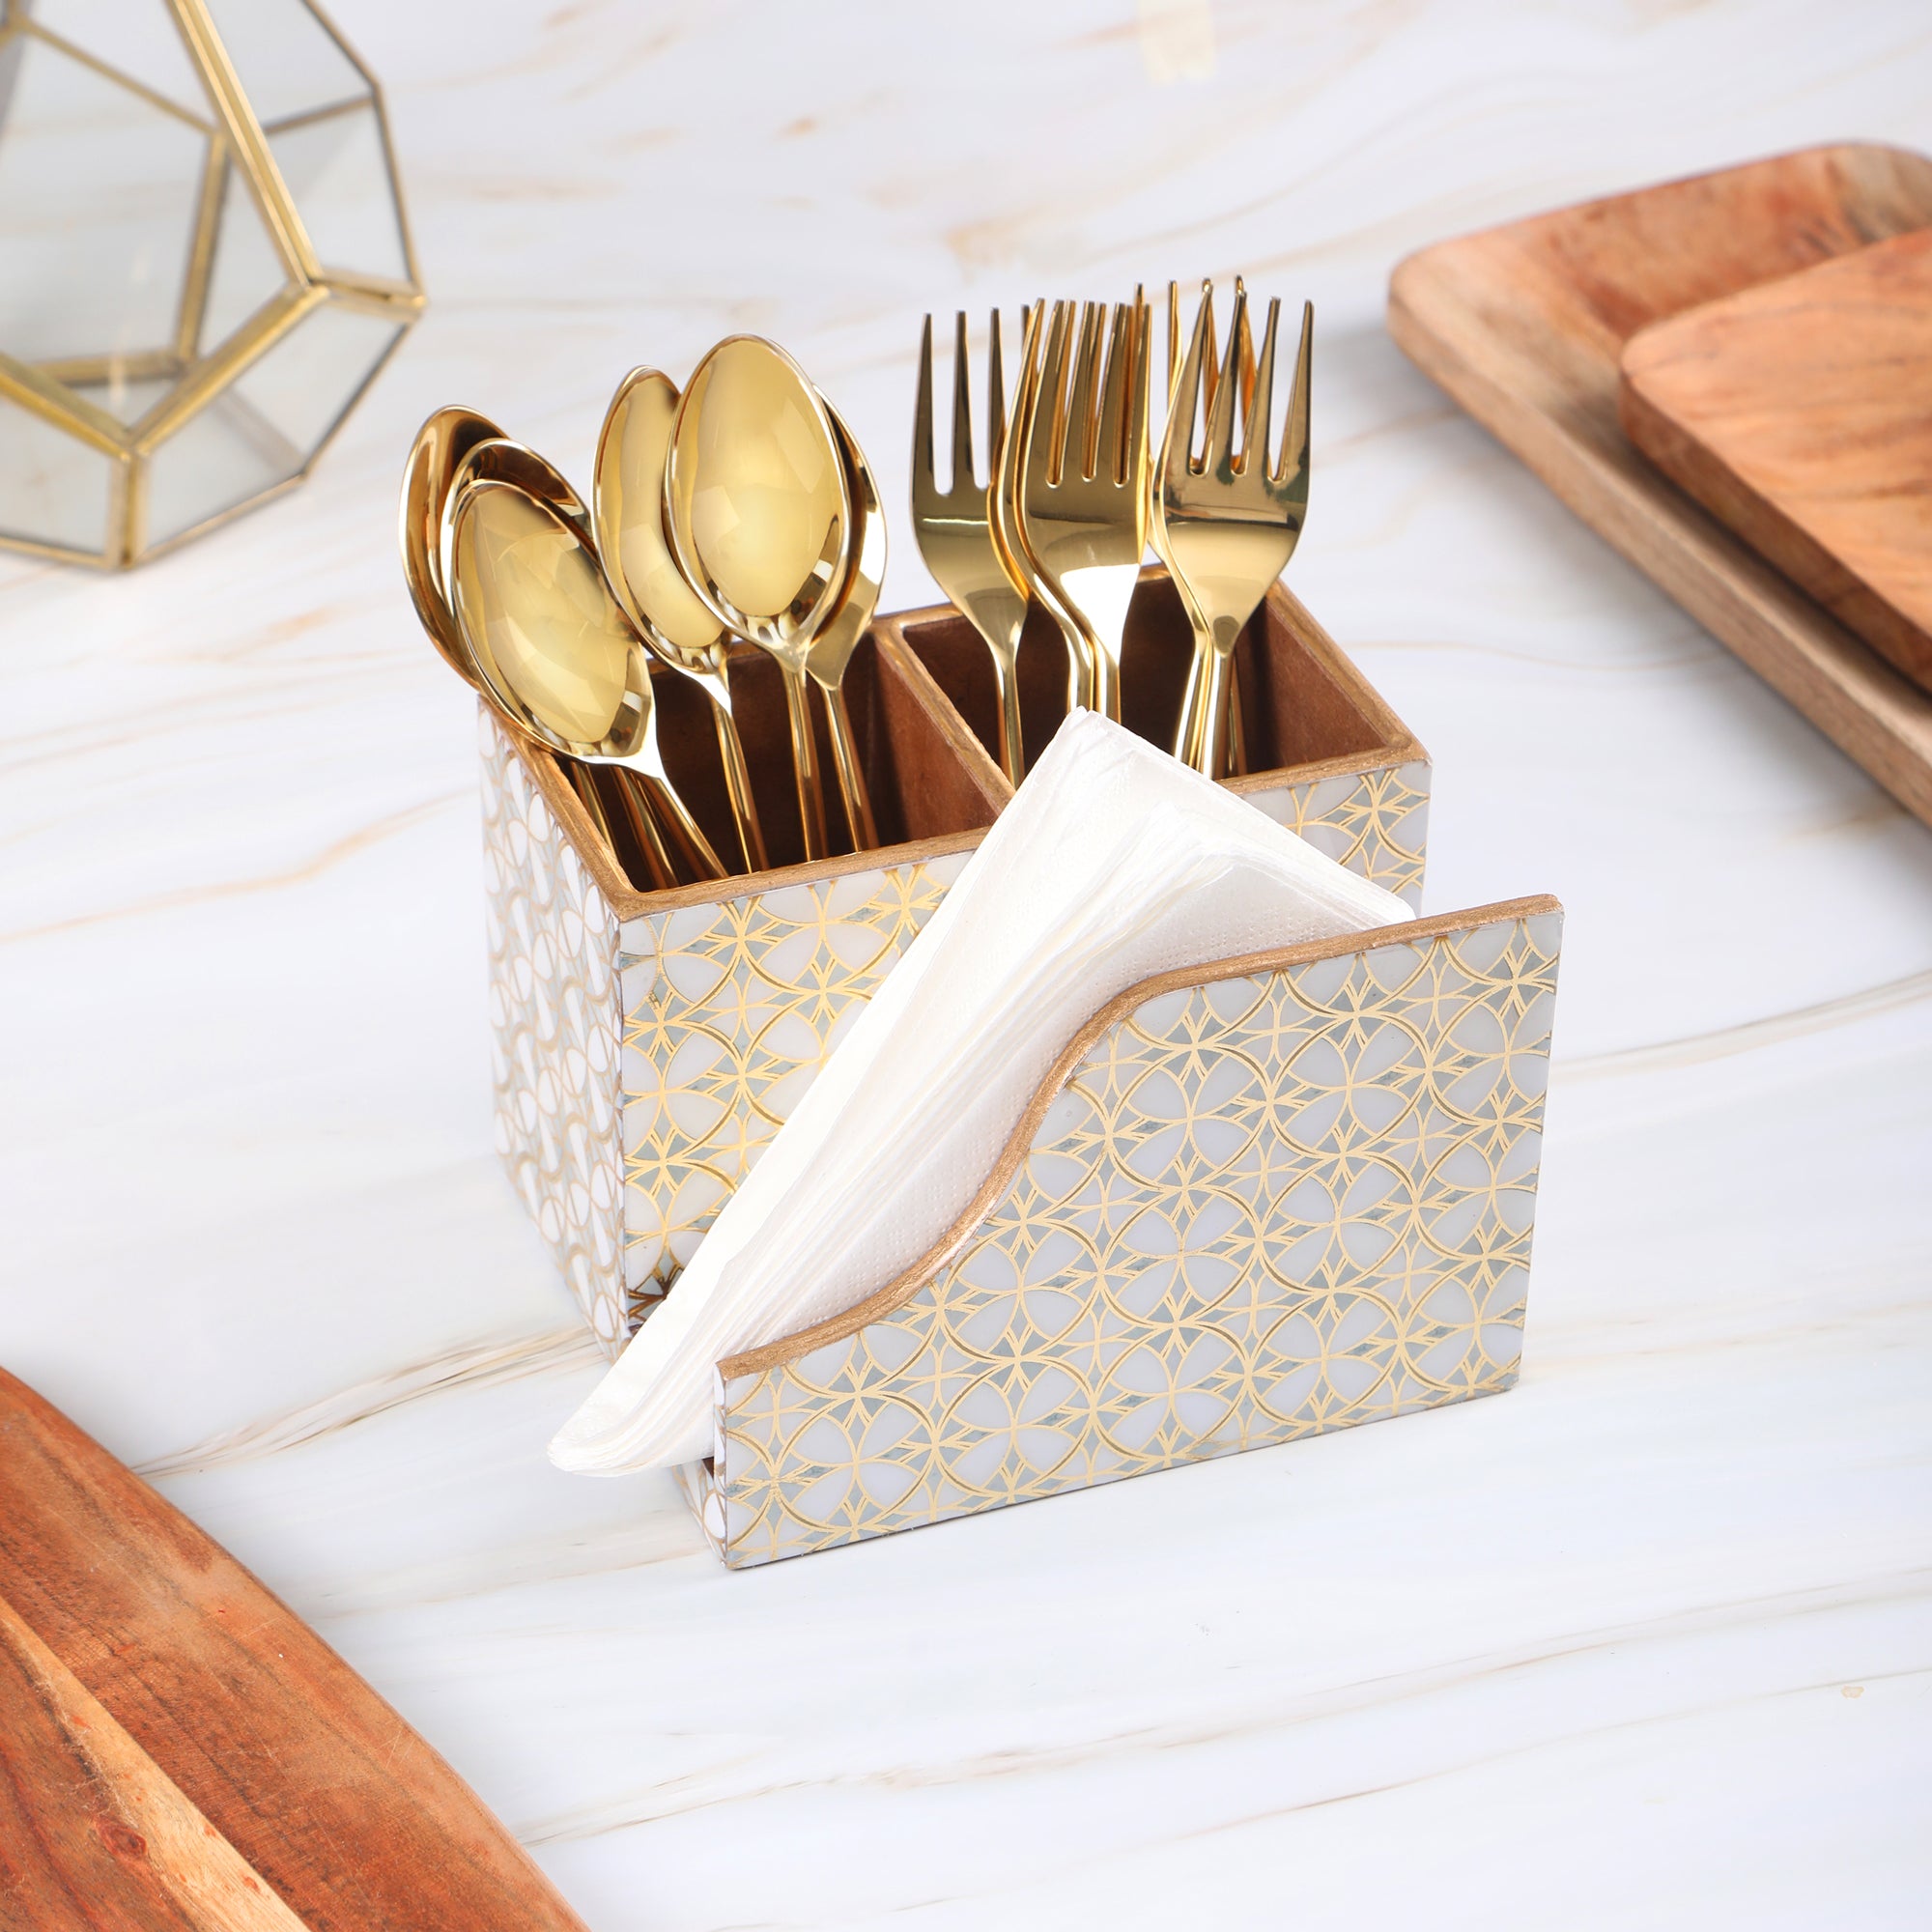 Cutlery Tissue Holder - White & Gold - The Home Co.